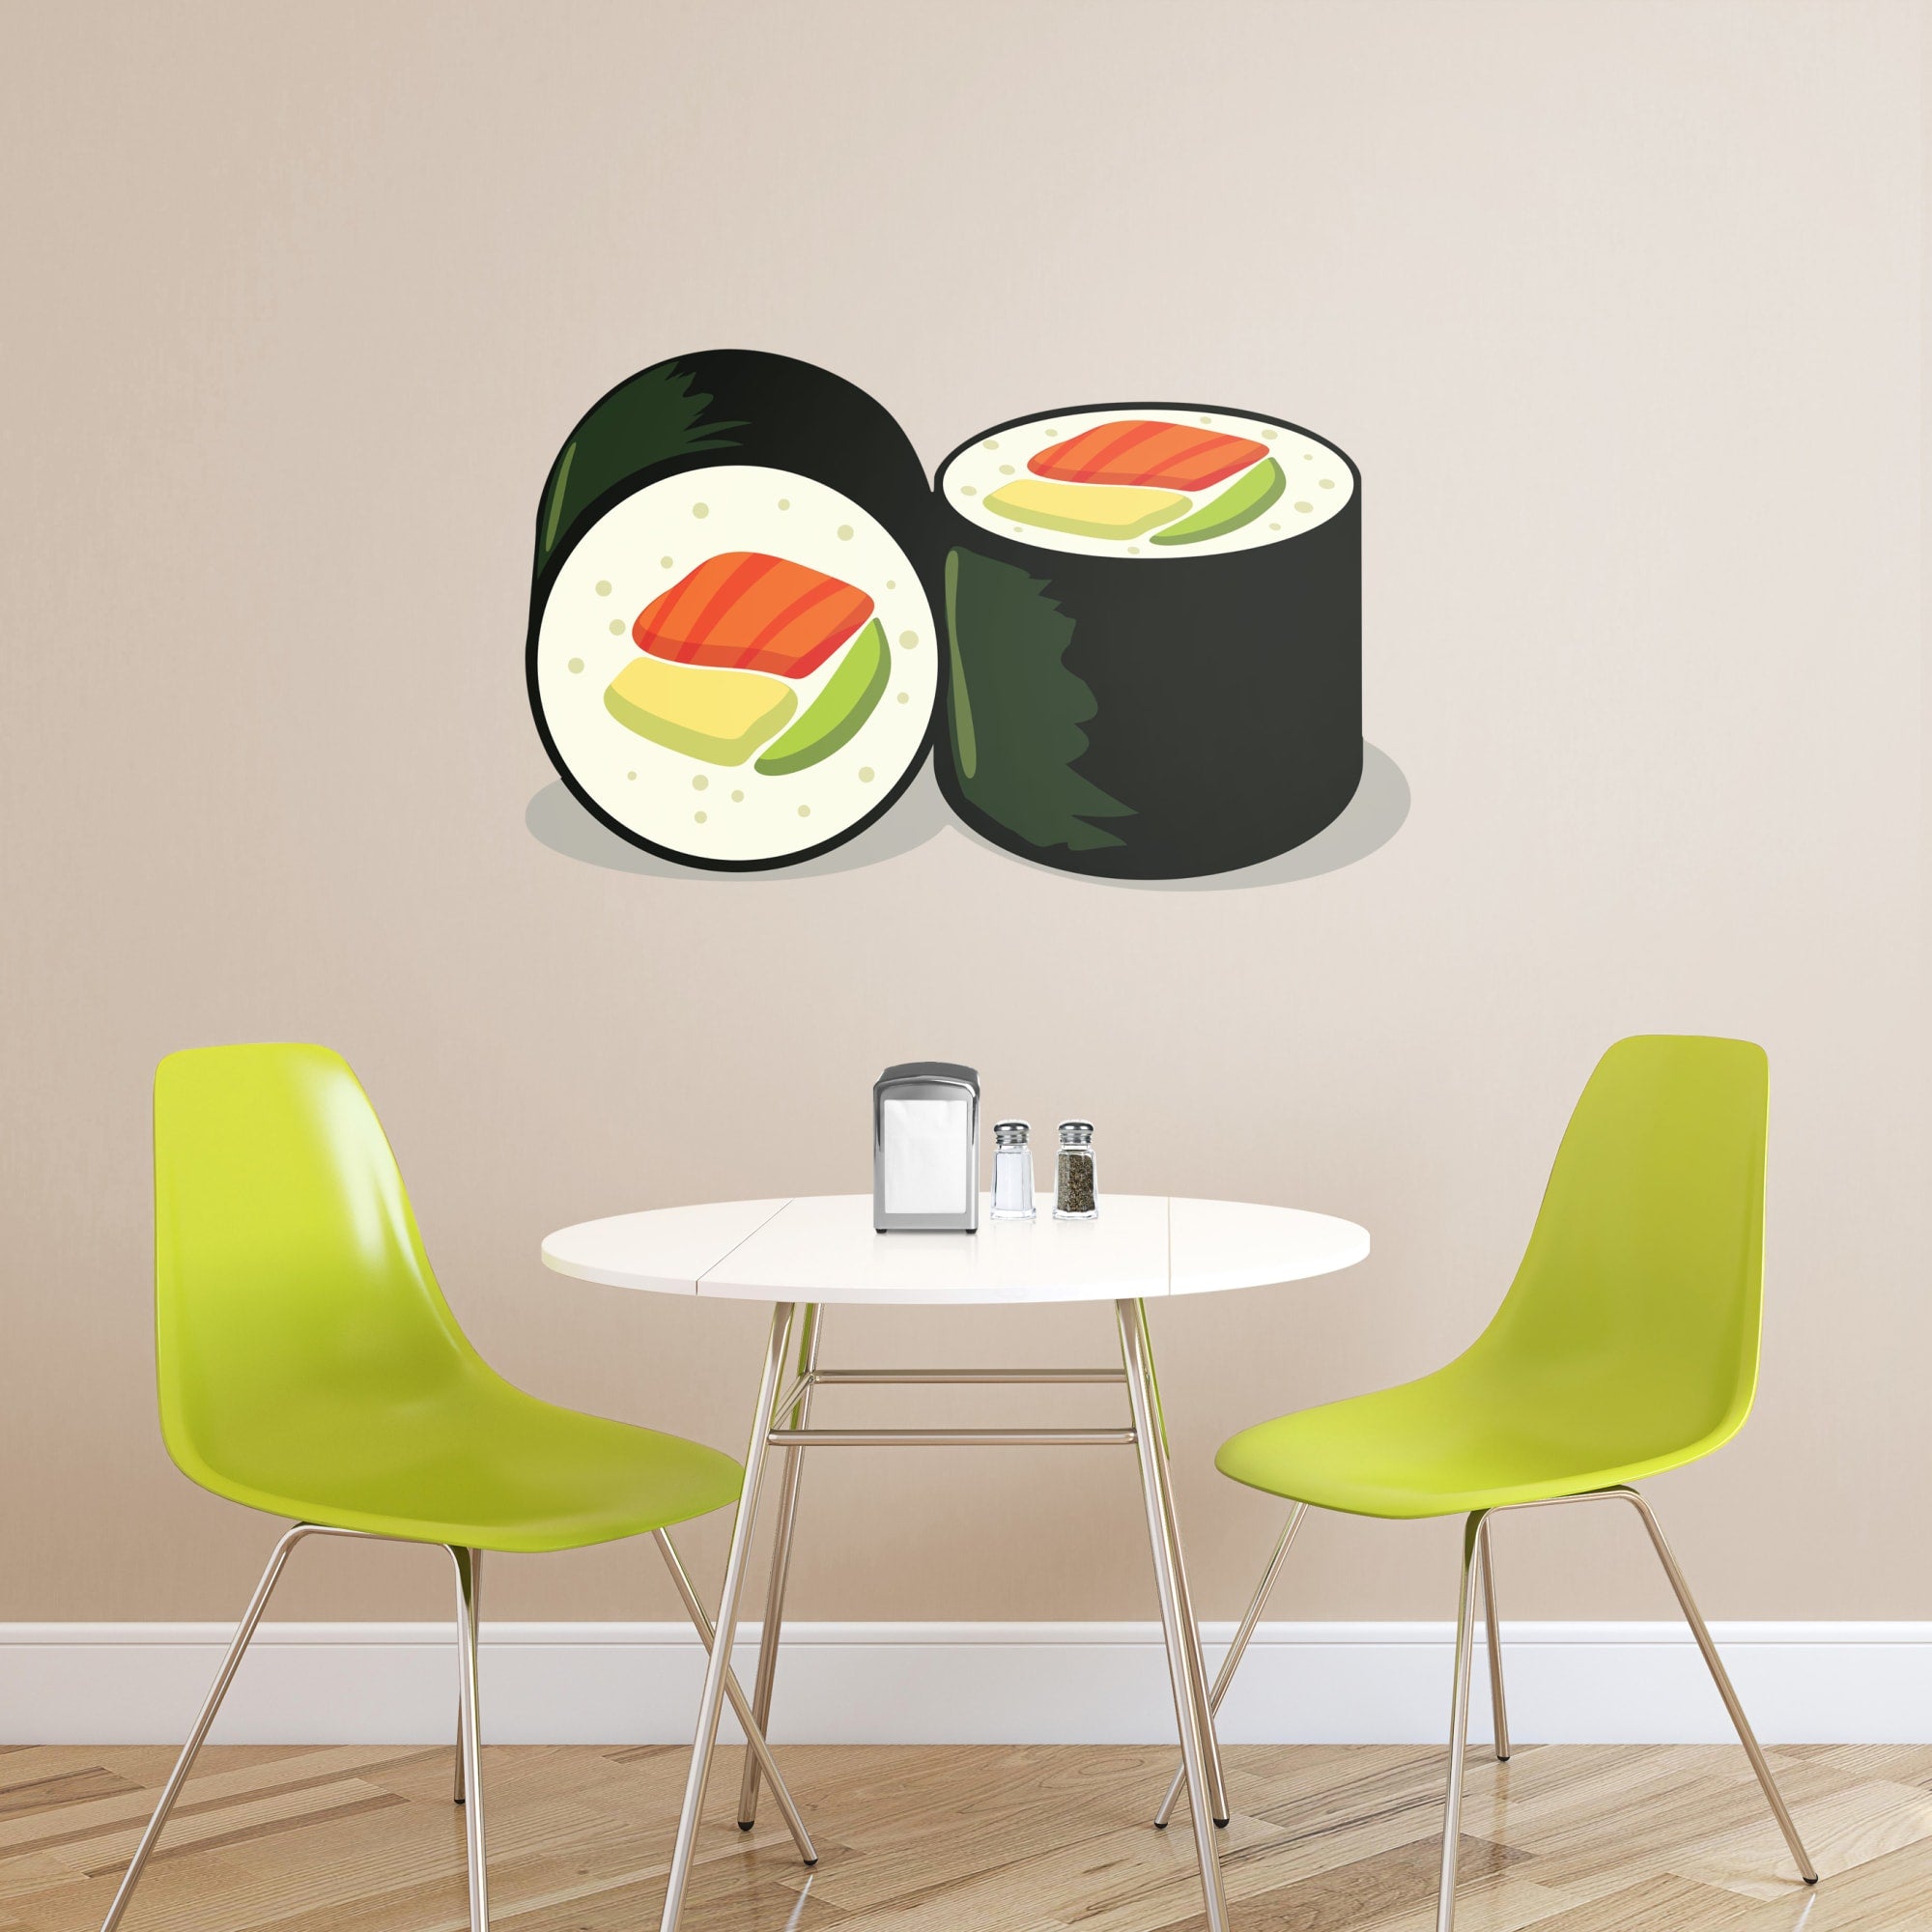 Sushi Roll: Illustrated - Removable Vinyl Decal Giant Sushi Roll + 2 Decals (49"W x 30"H) by Fathead